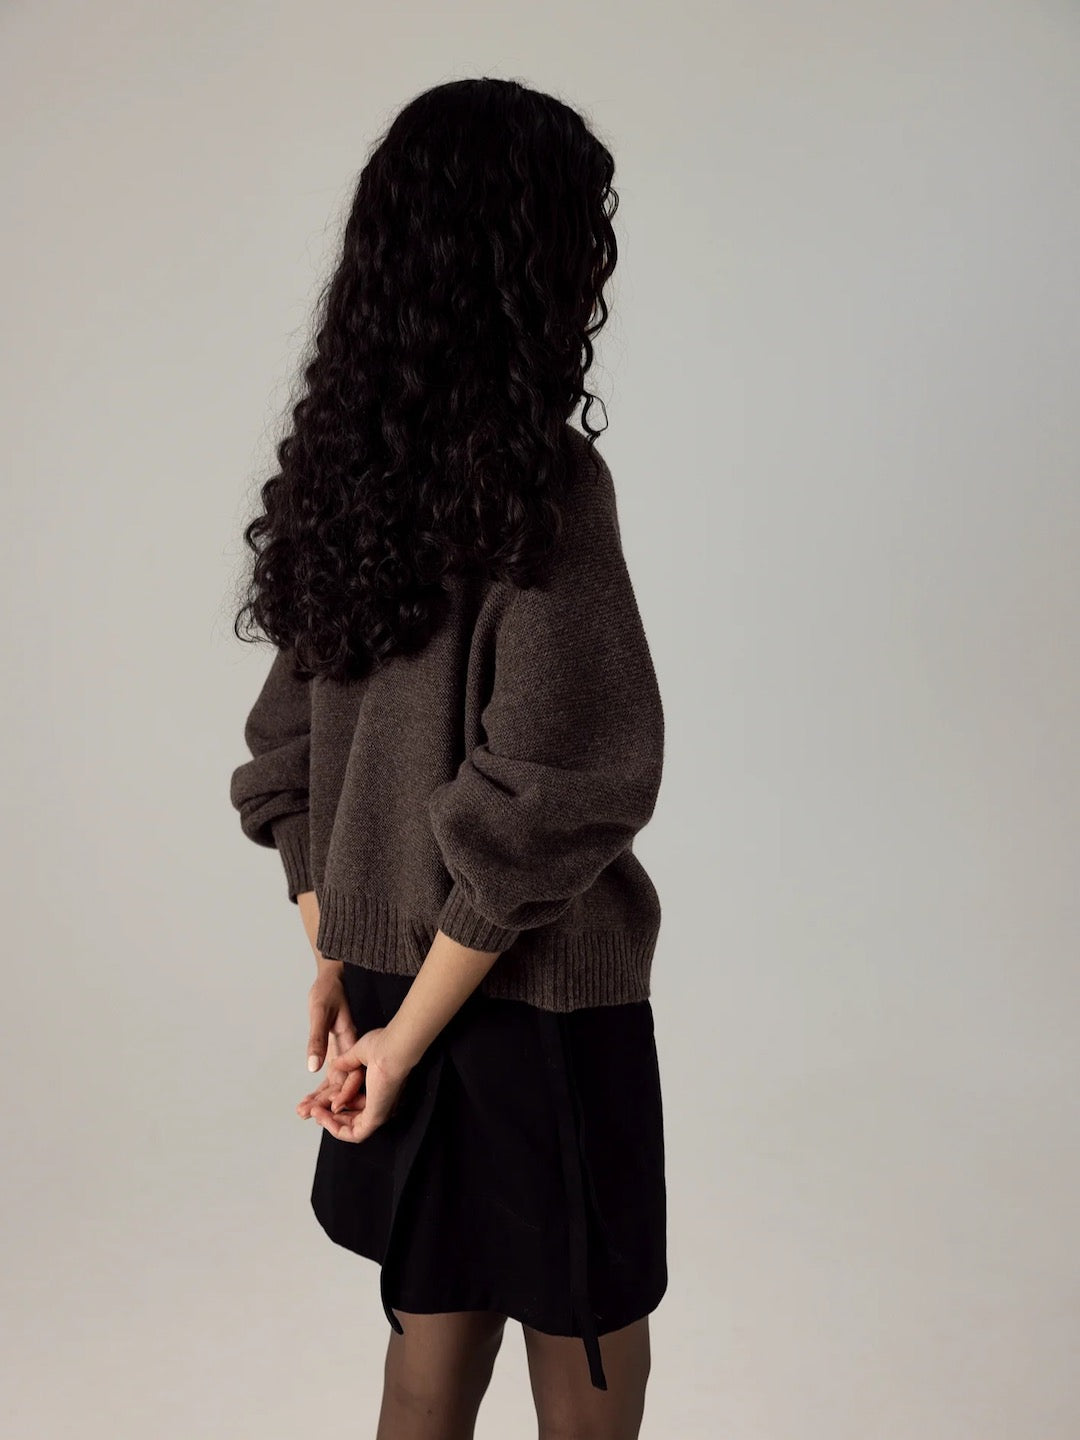 A woman with long hair wearing a Francie Poet Knit – Truffle and black skirt.